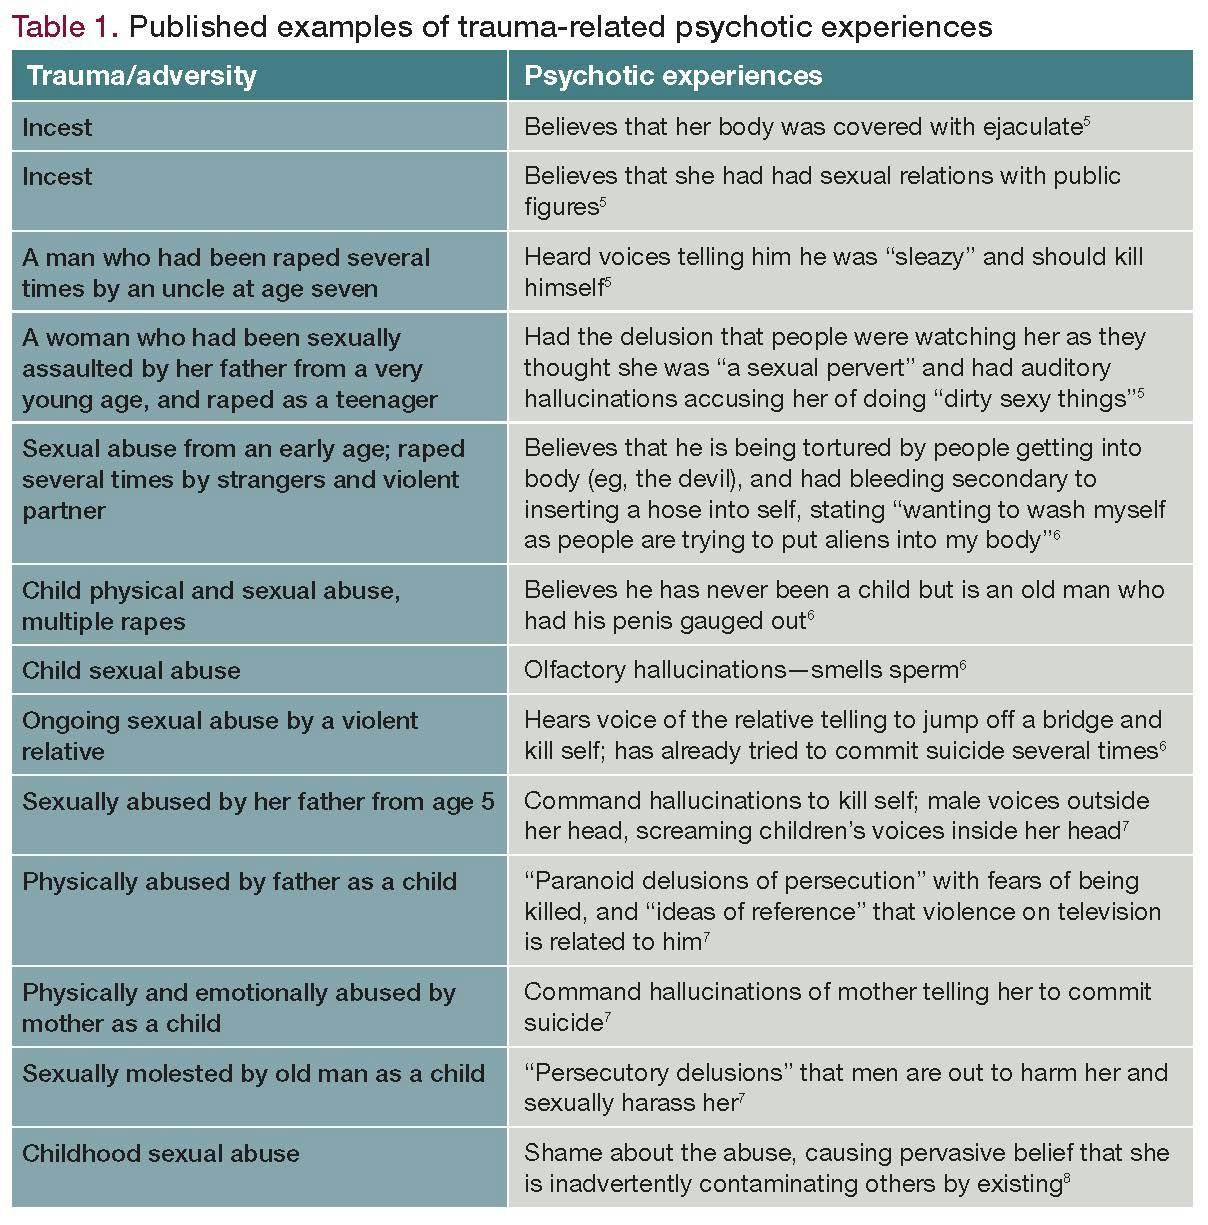 Table 1. Published examples of trauma-related psychotic experiences